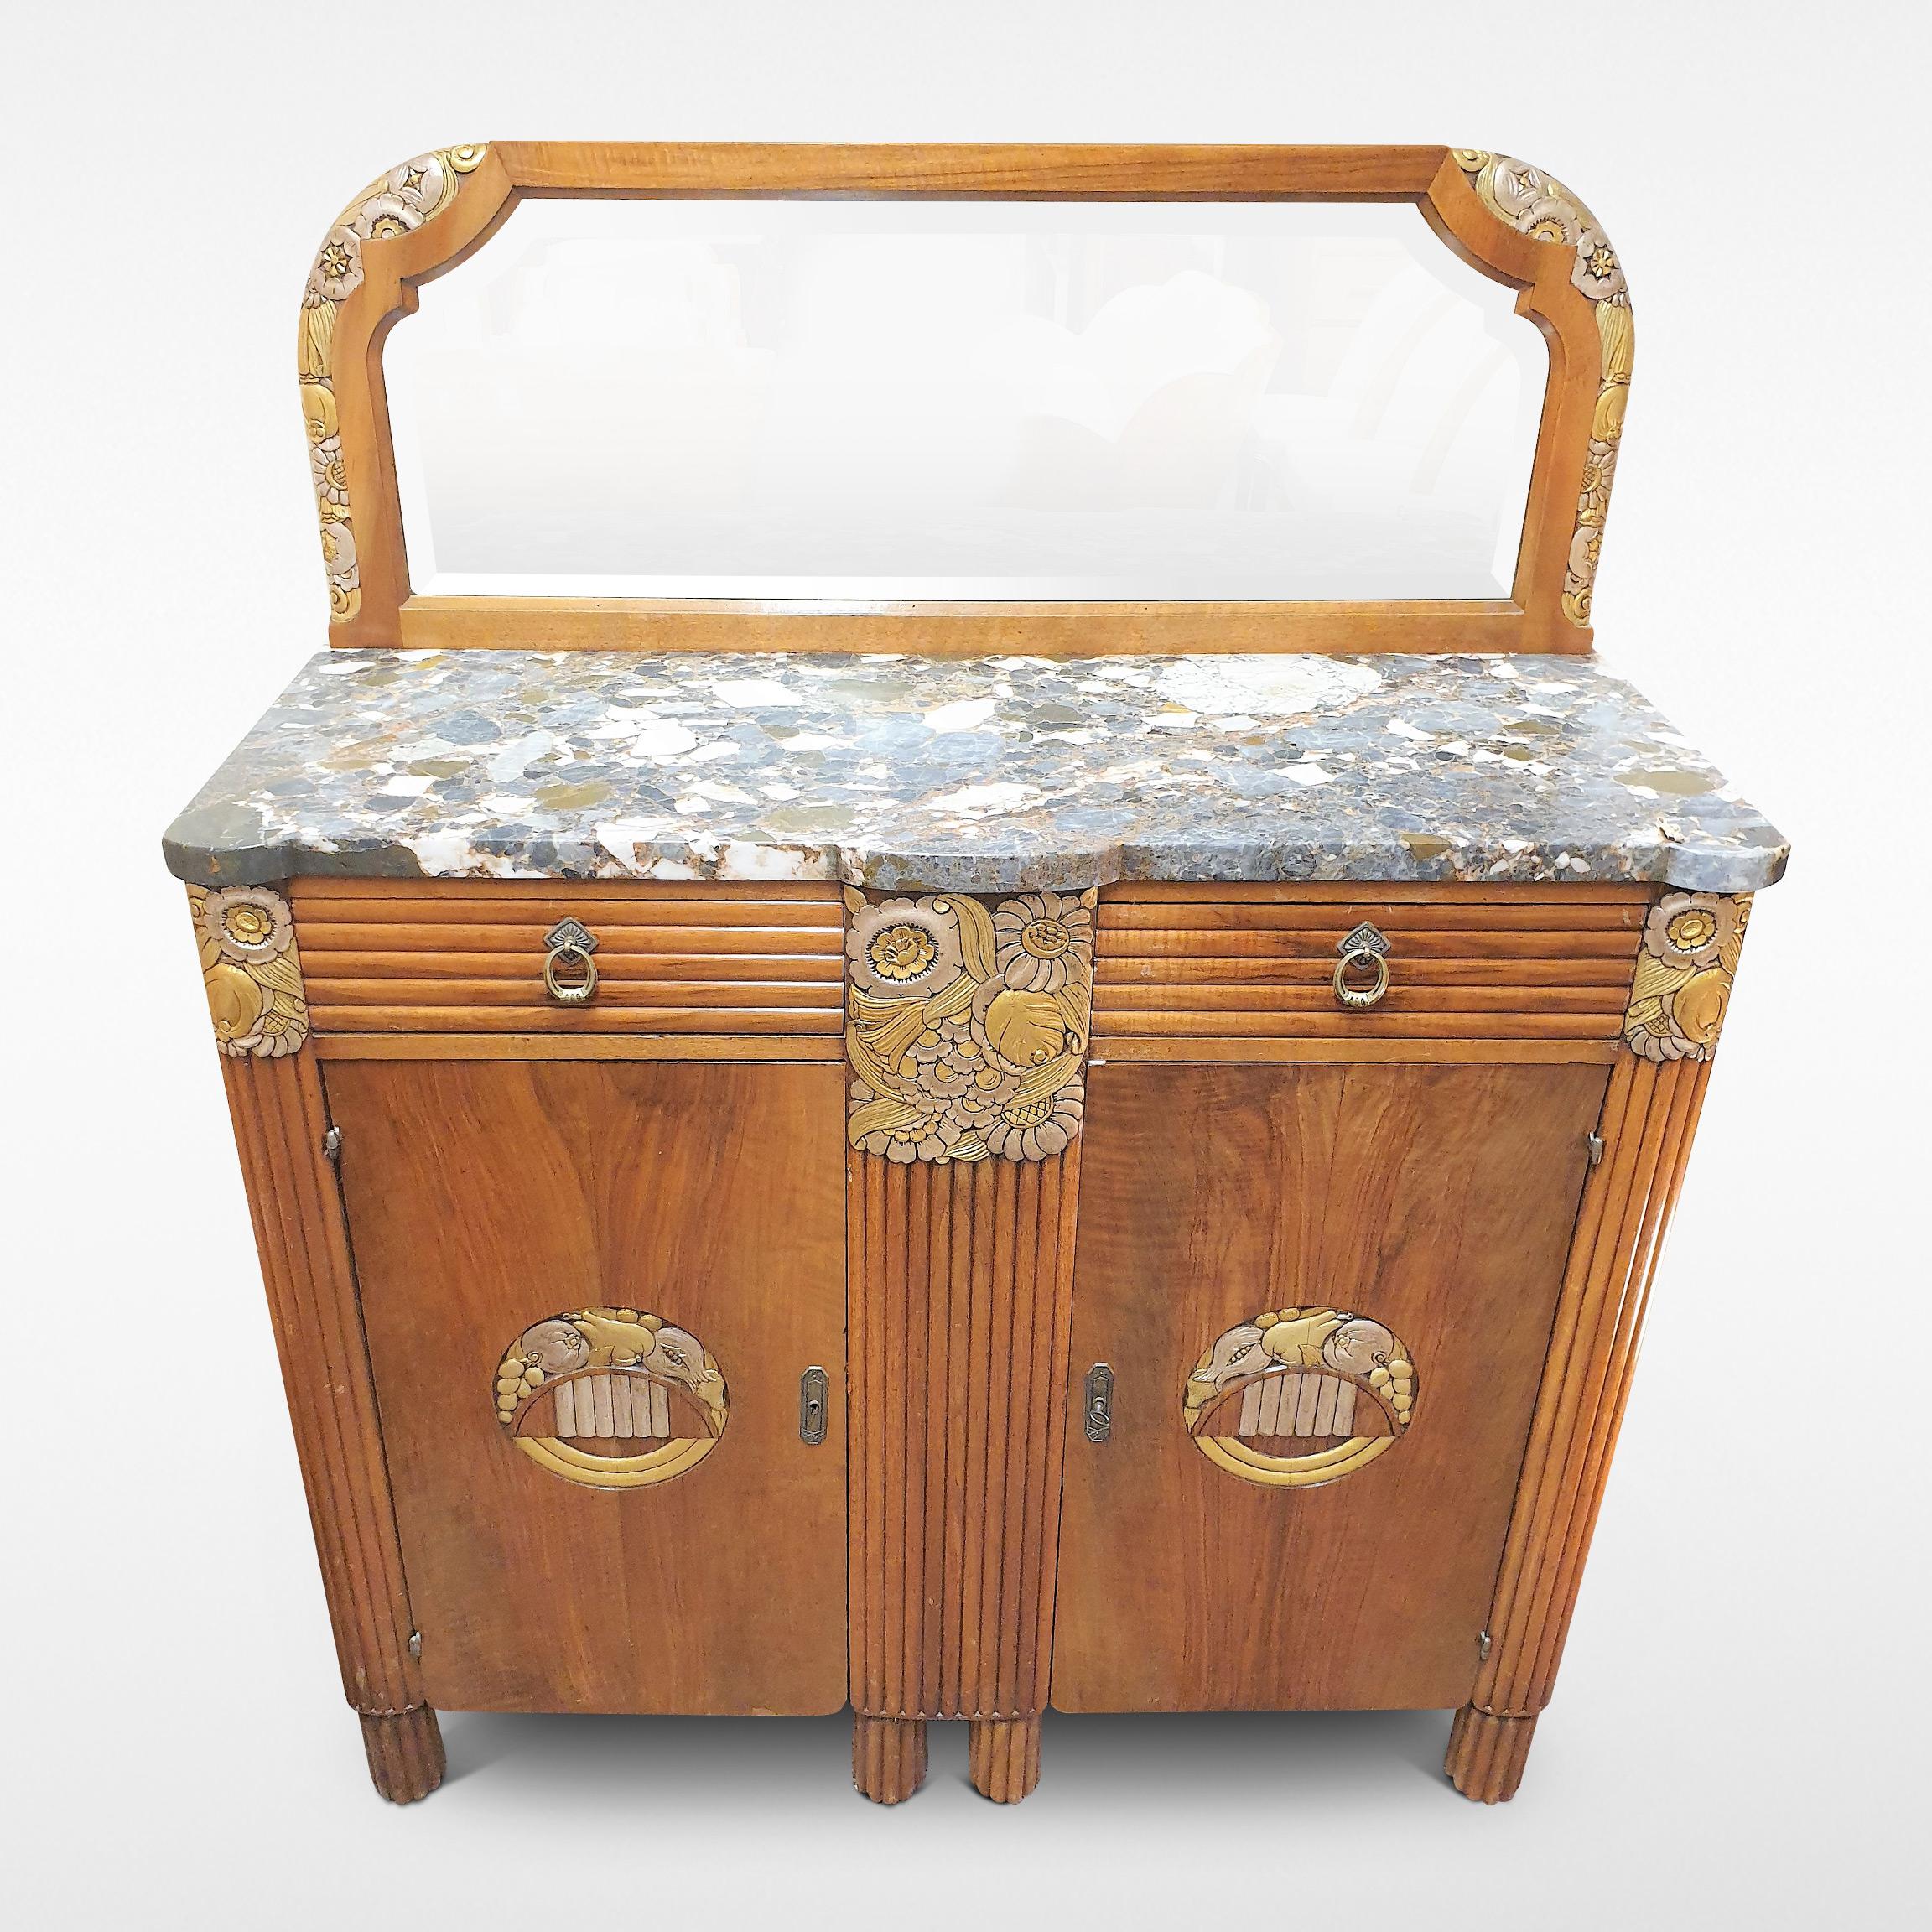 Art Deco French marble-top walnut sideboard with gilt carved detailing and reeded drawer fronts, circa 1930.